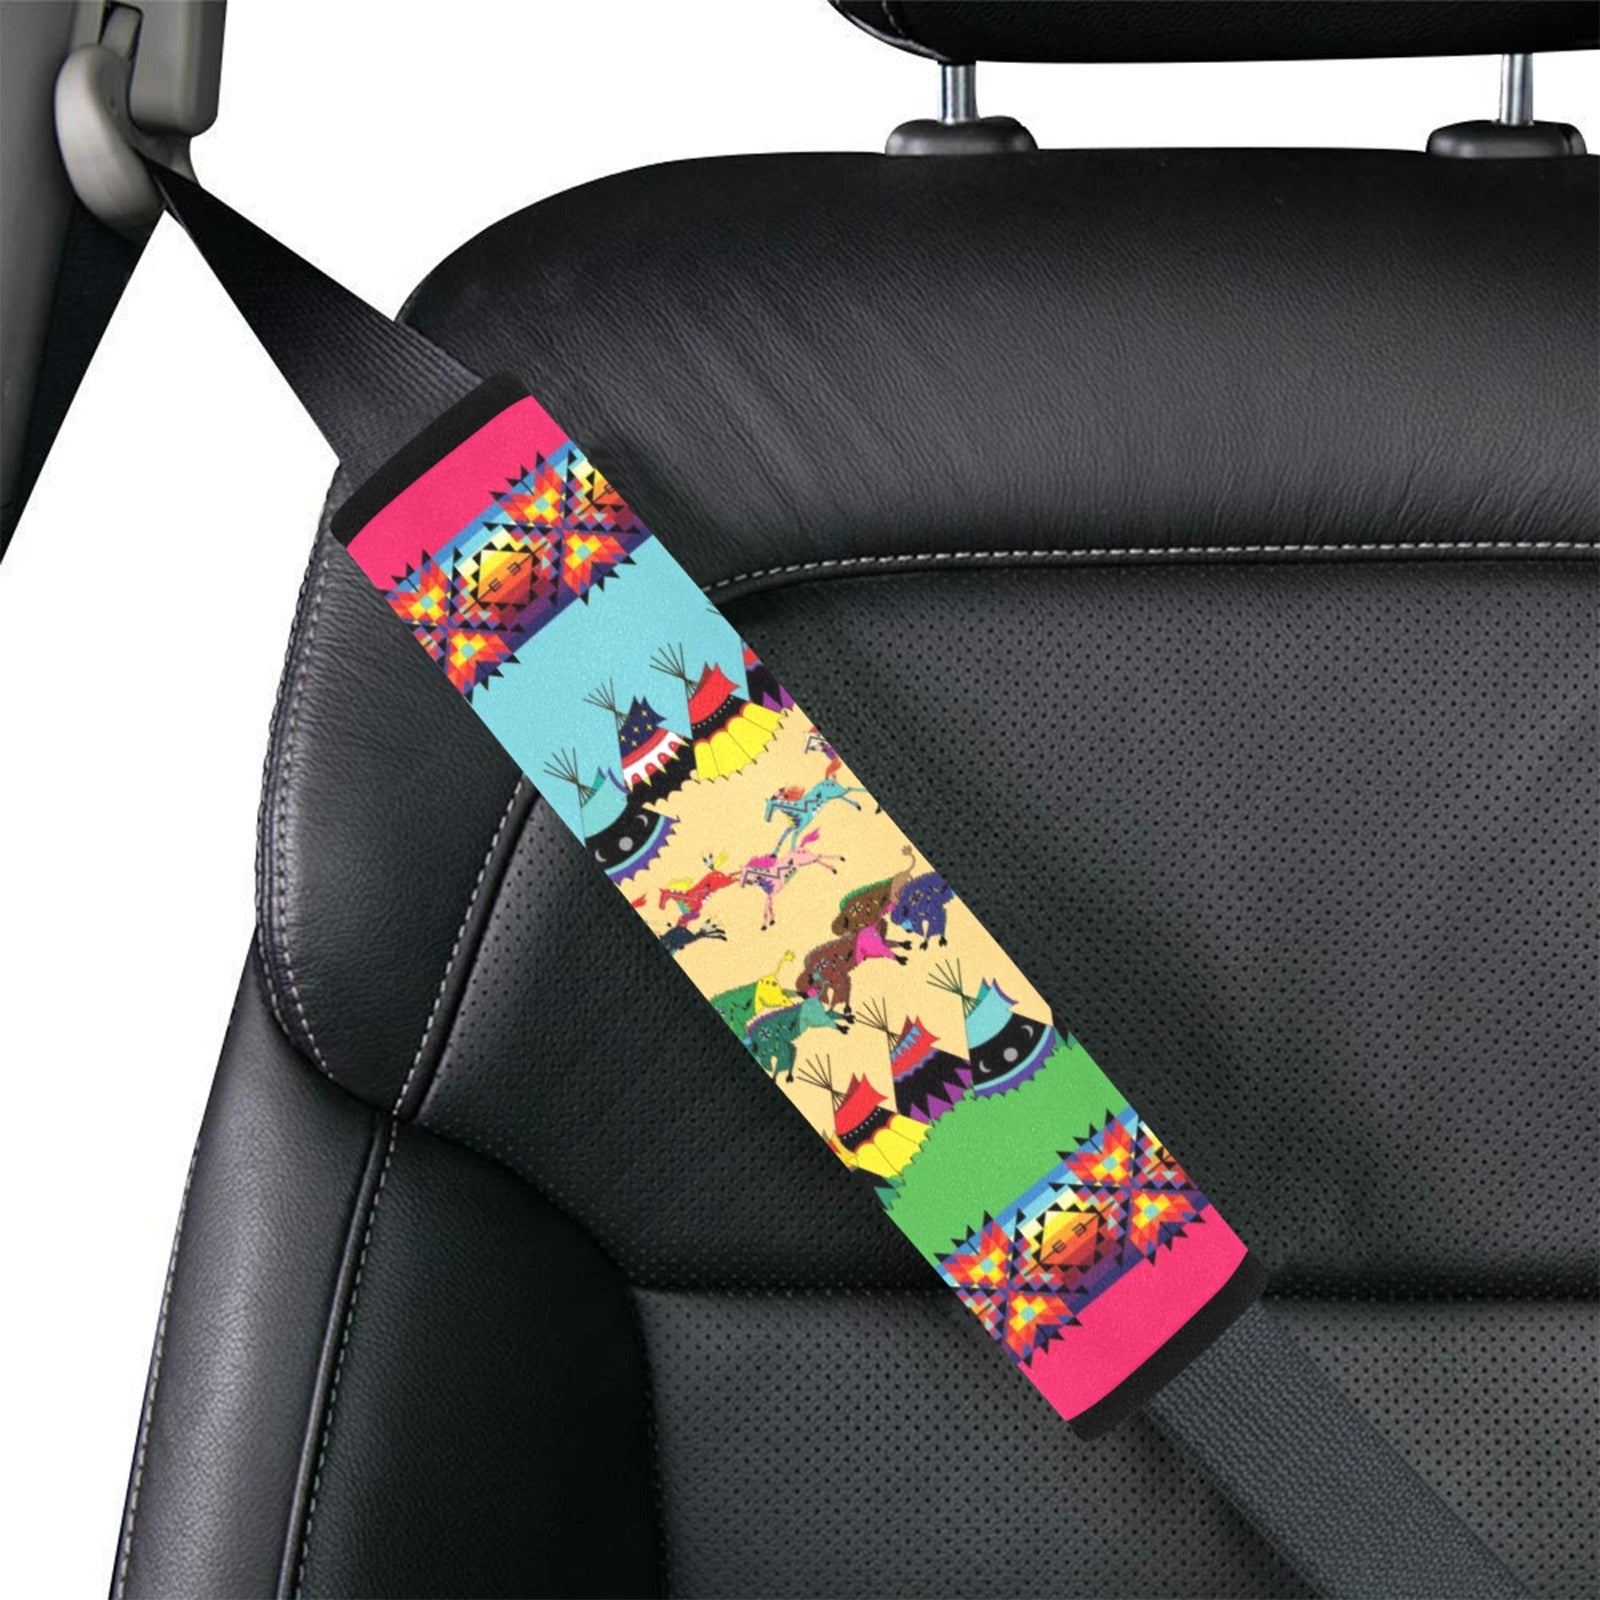 Horses and Buffalo Ledger Pink Car Seat Belt Cover 7''x12.6'' (Pack of 2)